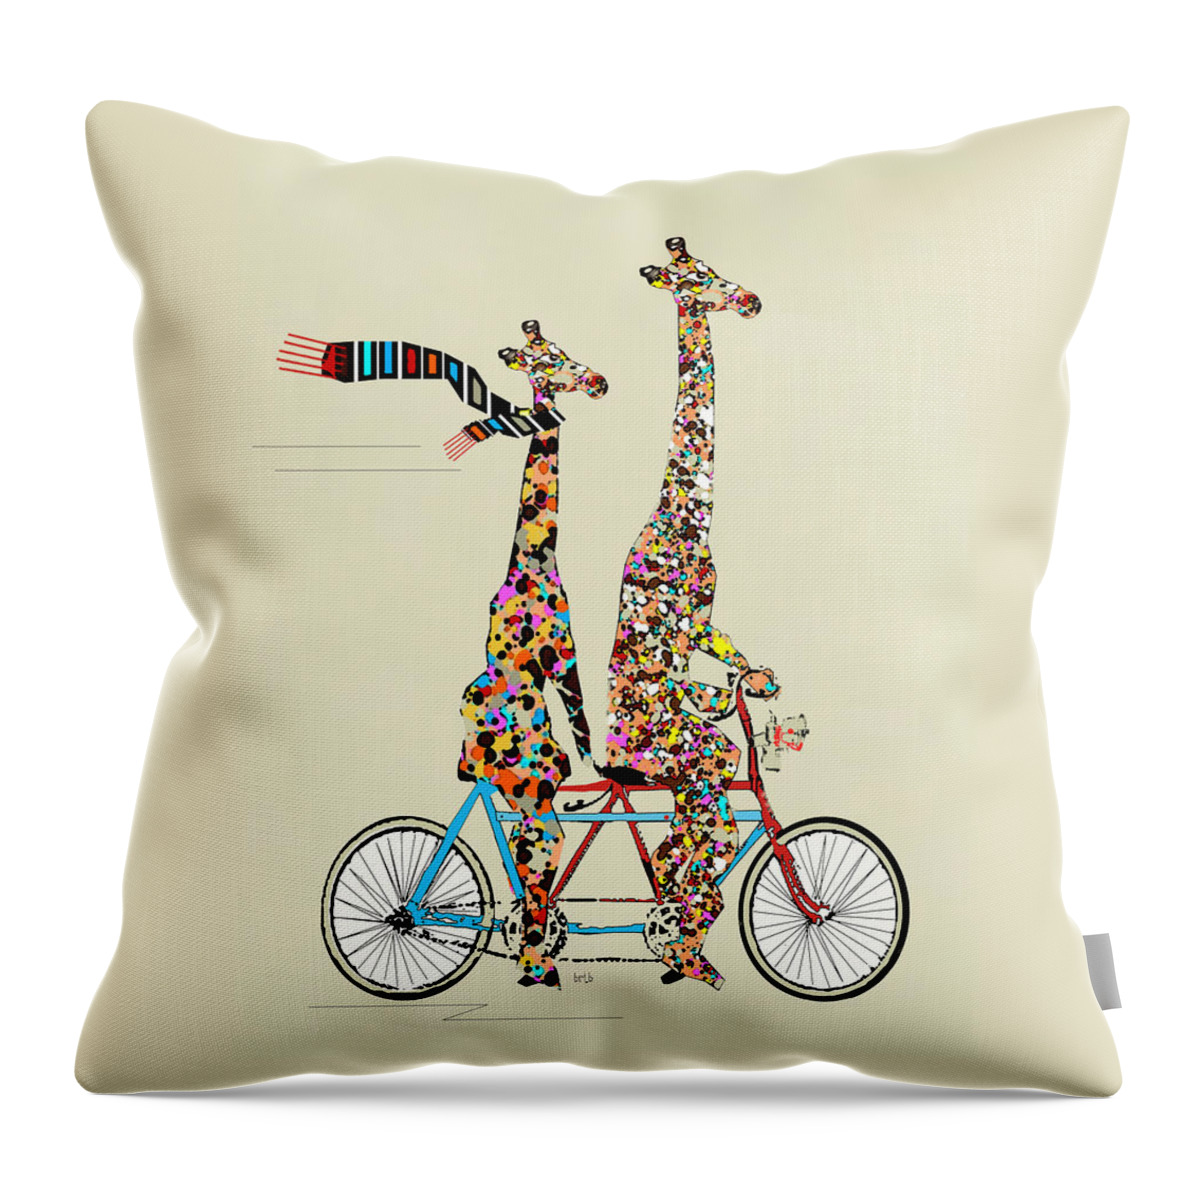 Giraffes Throw Pillow featuring the painting Giraffe Days Lets Tandem by Bri Buckley